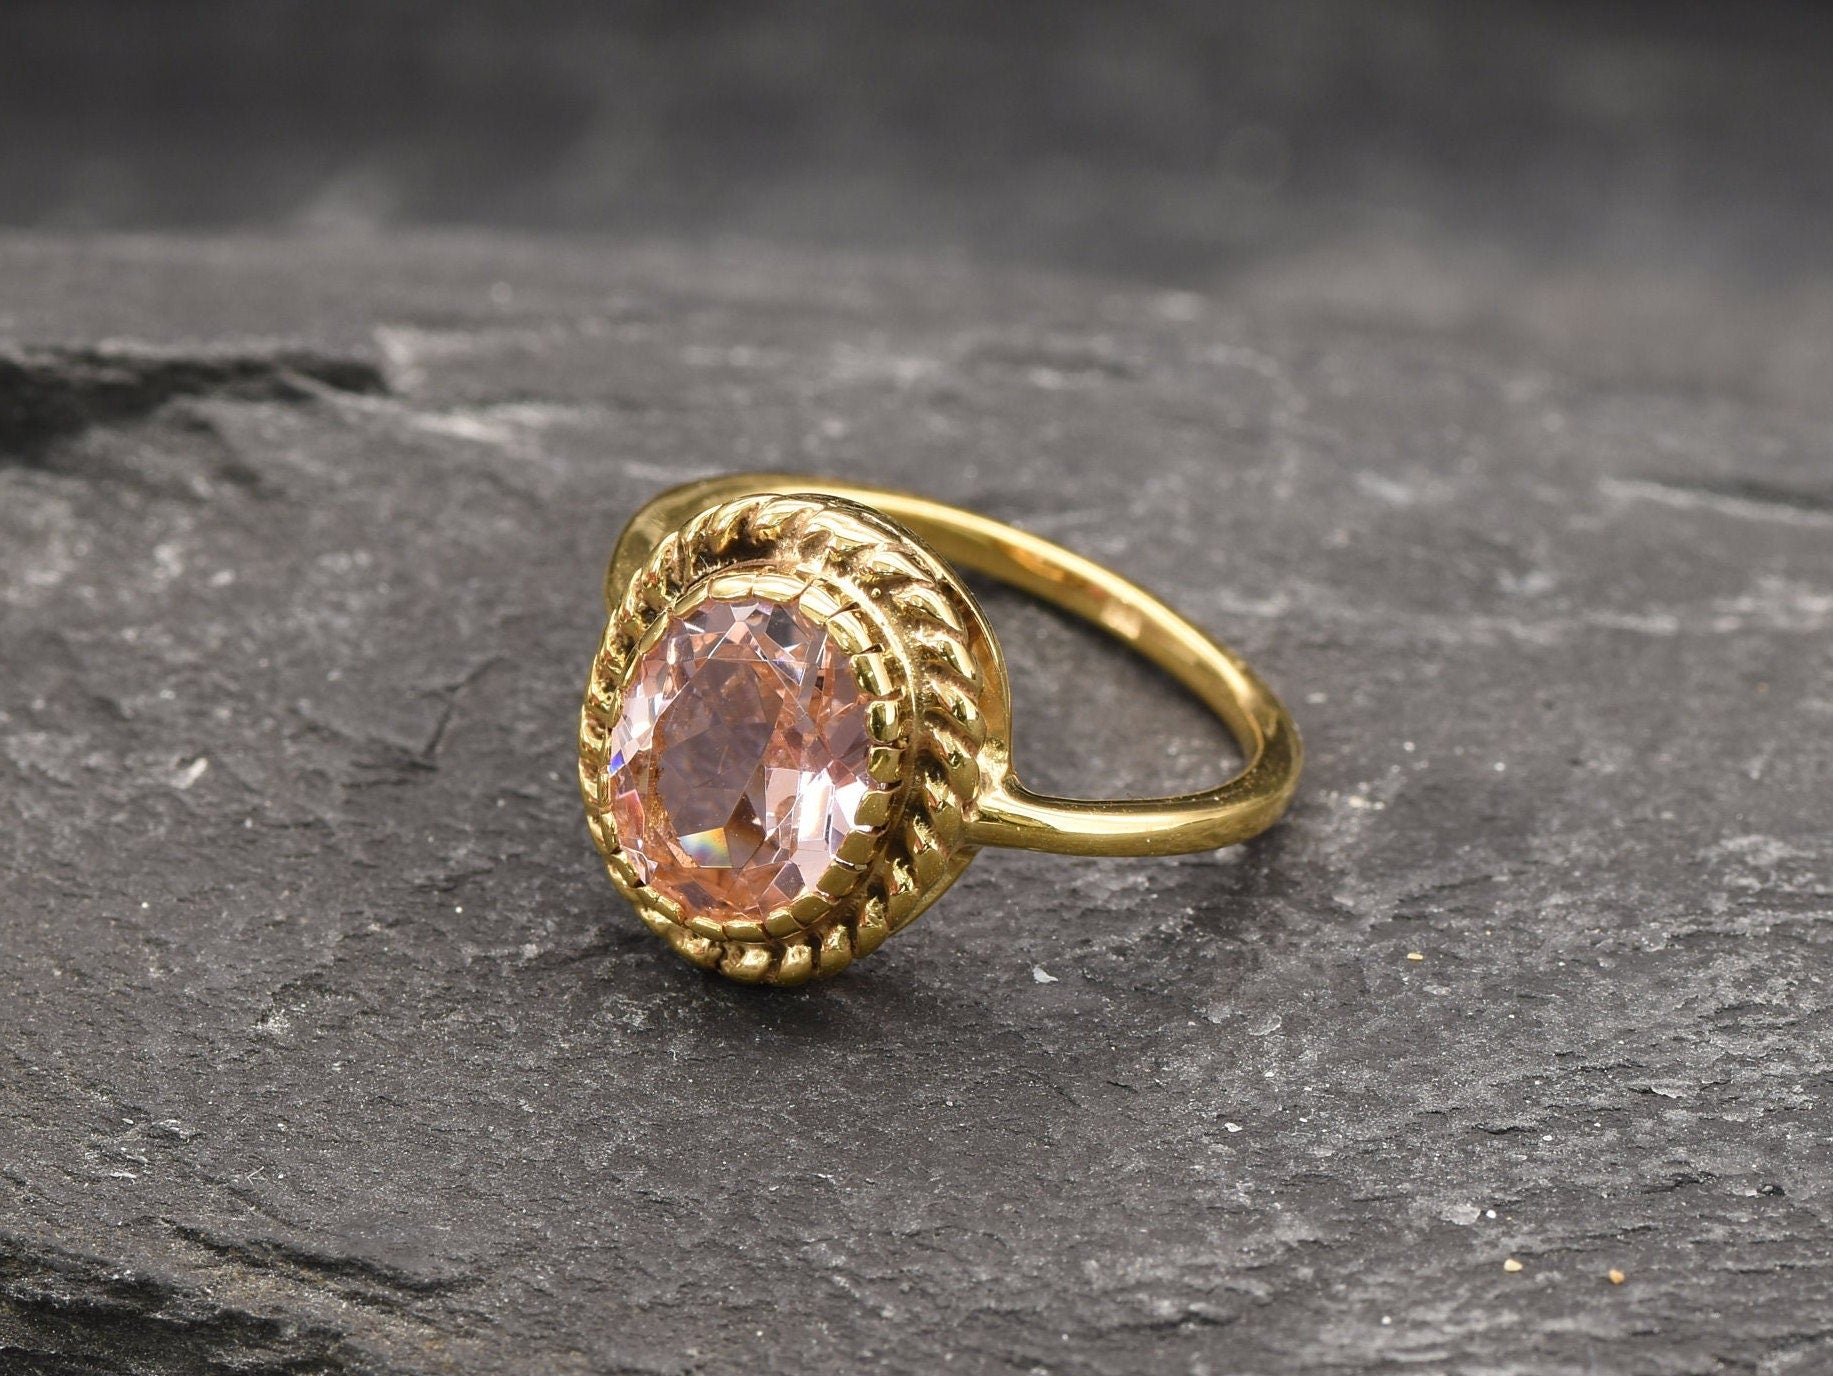 Gold Morganite Ring, Gold Victorian Ring, Created Morganite, Pink Diamond Ring, Morganite Ring, Gold Antique Ring, Solitaire Ring, Vermeil